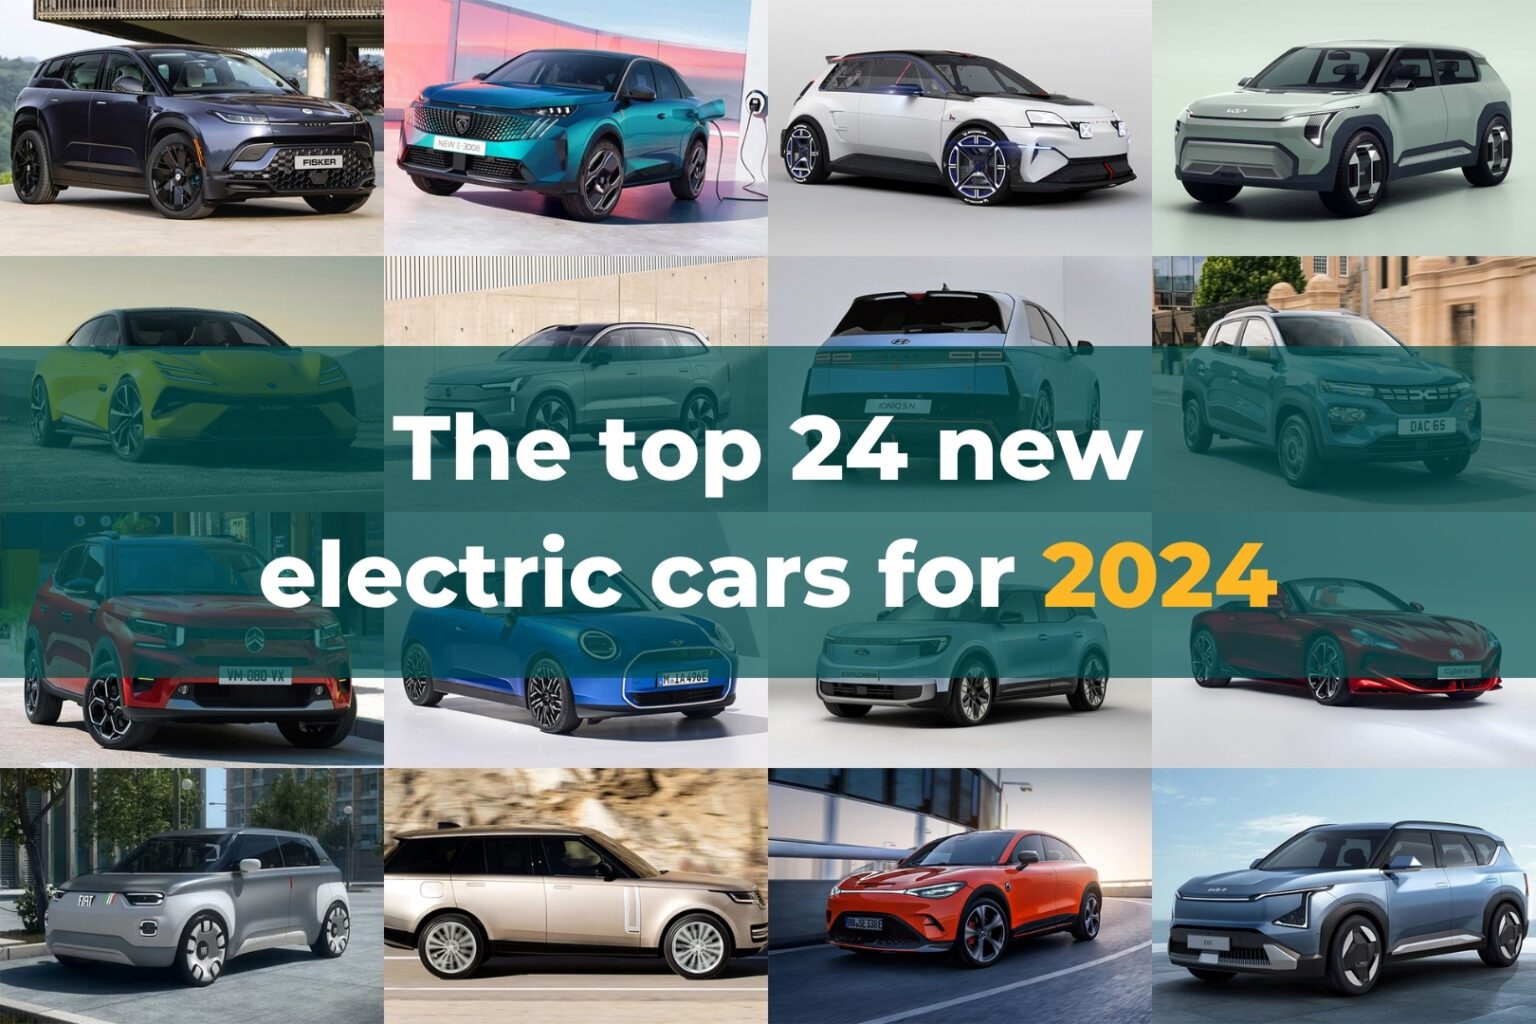 The top 24 new electric cars coming in 2024 GRIDSERVE